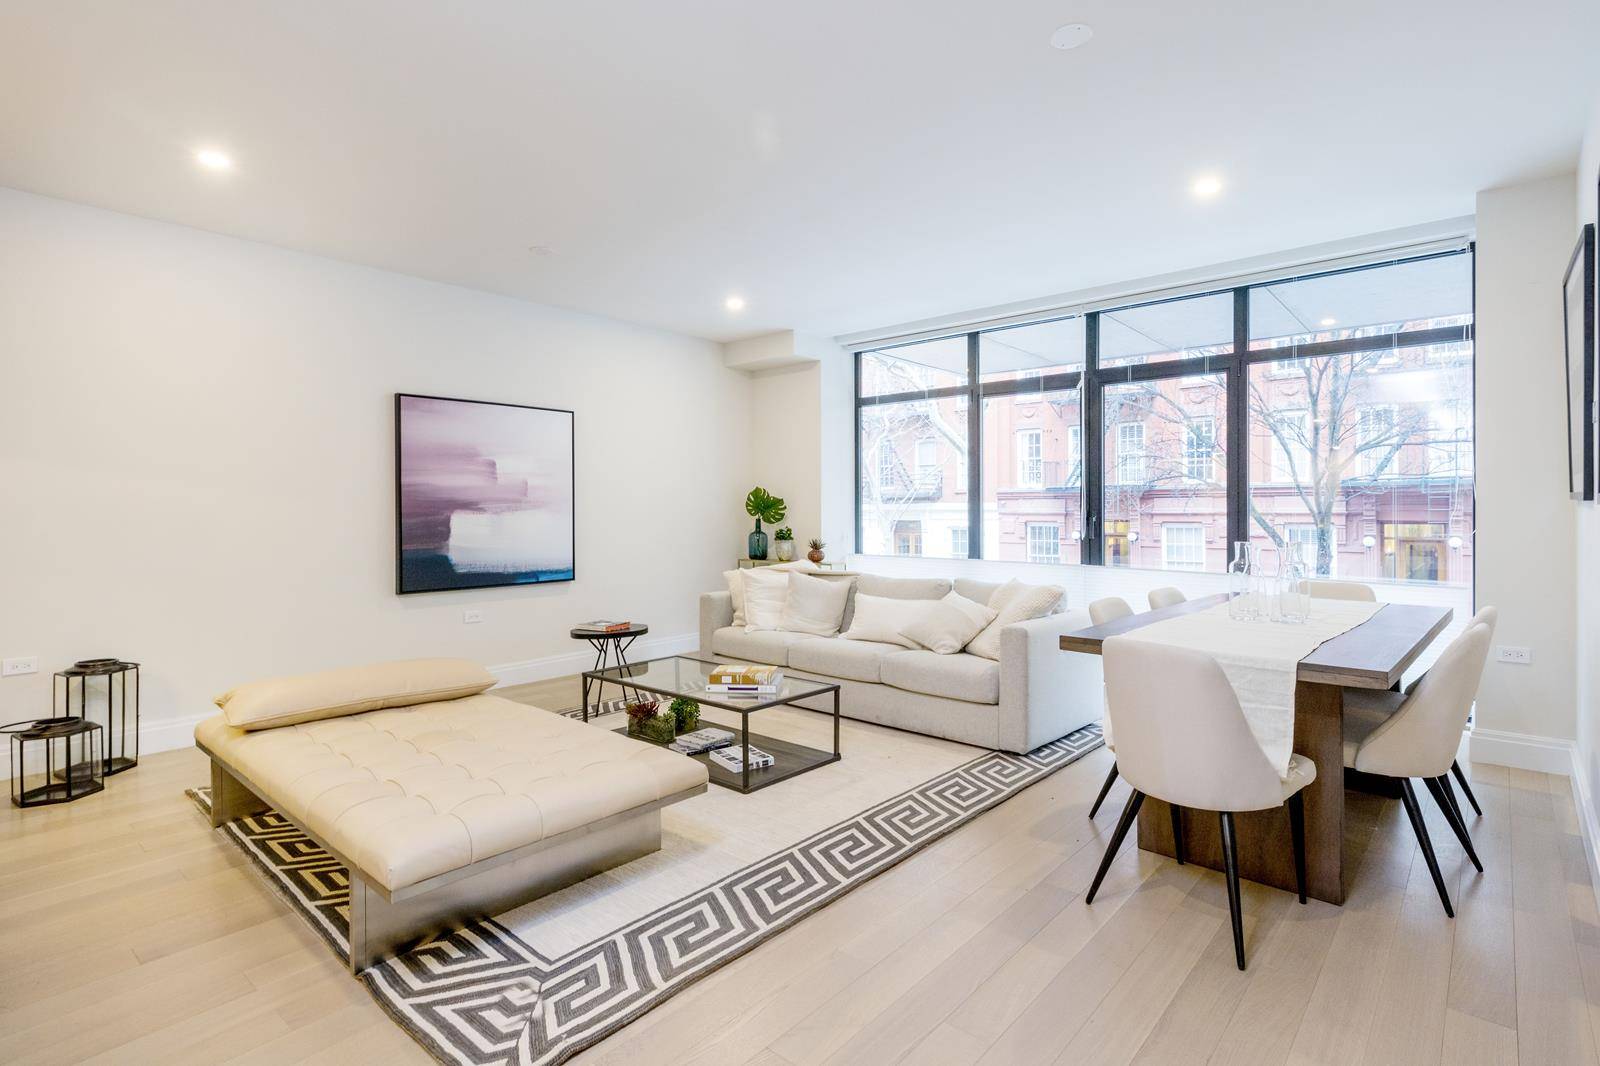 Welcome to 318 East 81st, a new boutique collection of two and three bedroom full floor condominium residences with a part time doorman.